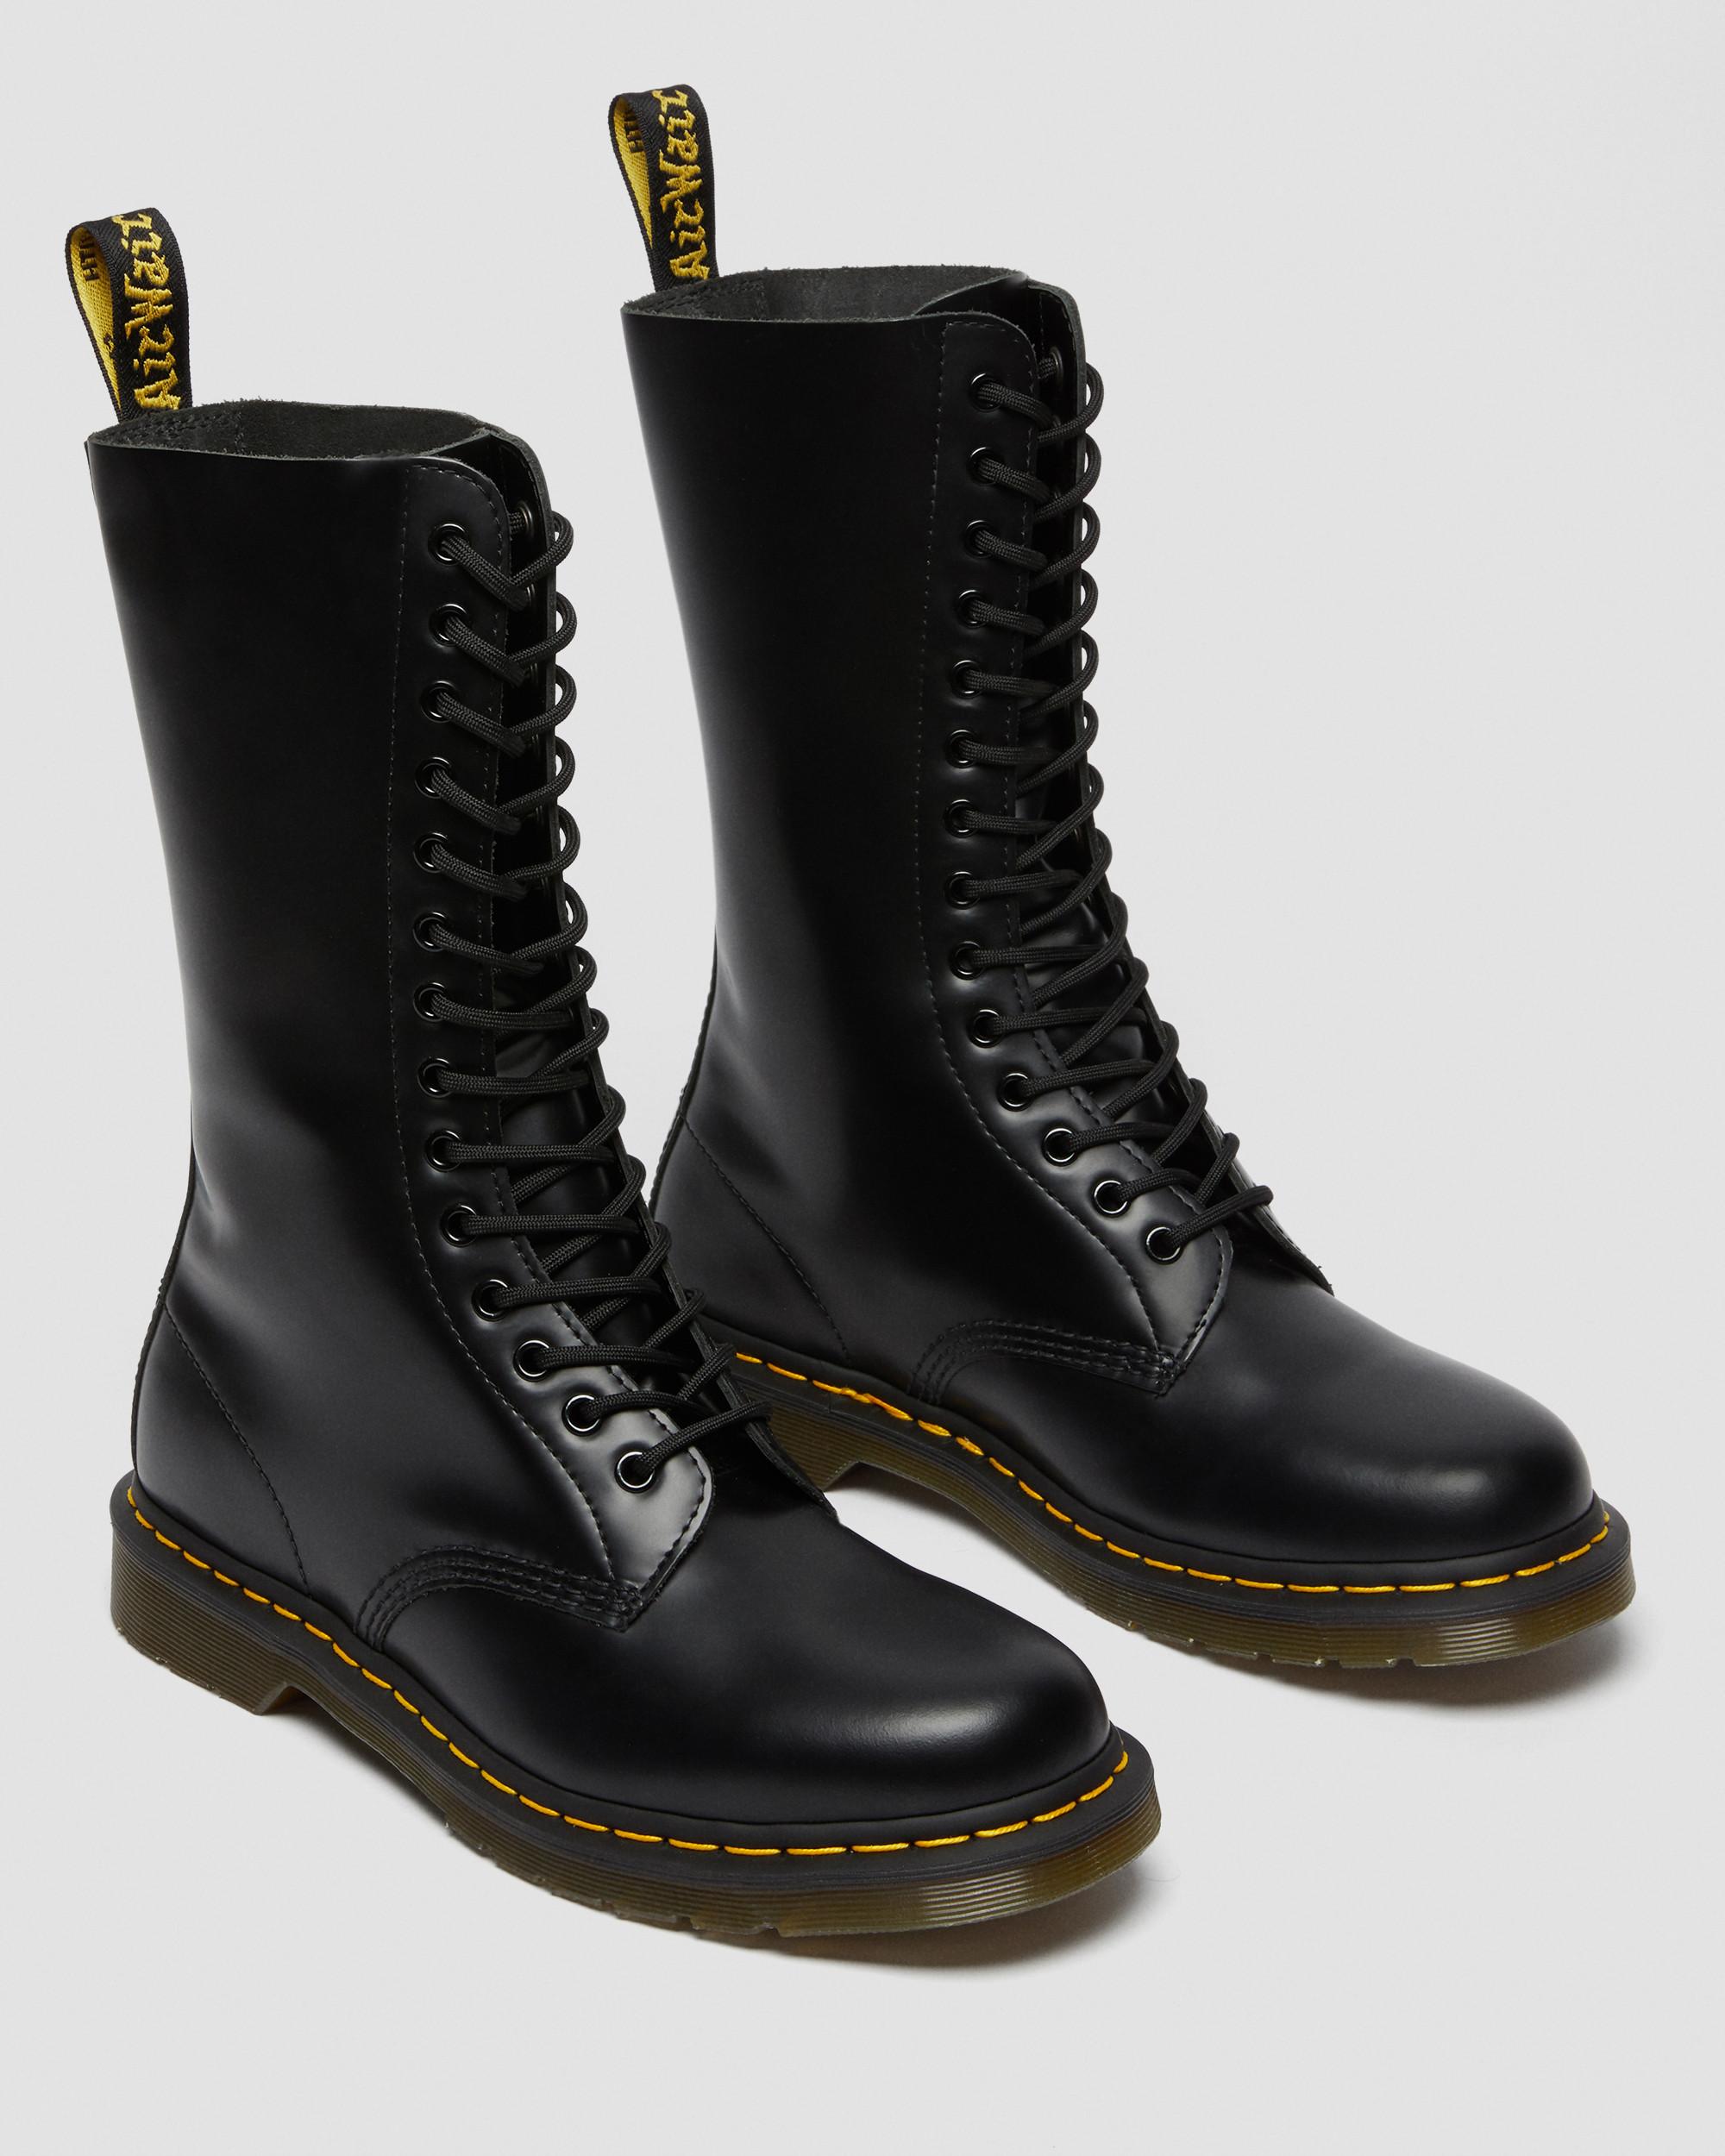 1914 Smooth Leather High Lace Up Boots1914 Smooth Leather High Lace Up Boots Dr. Martens